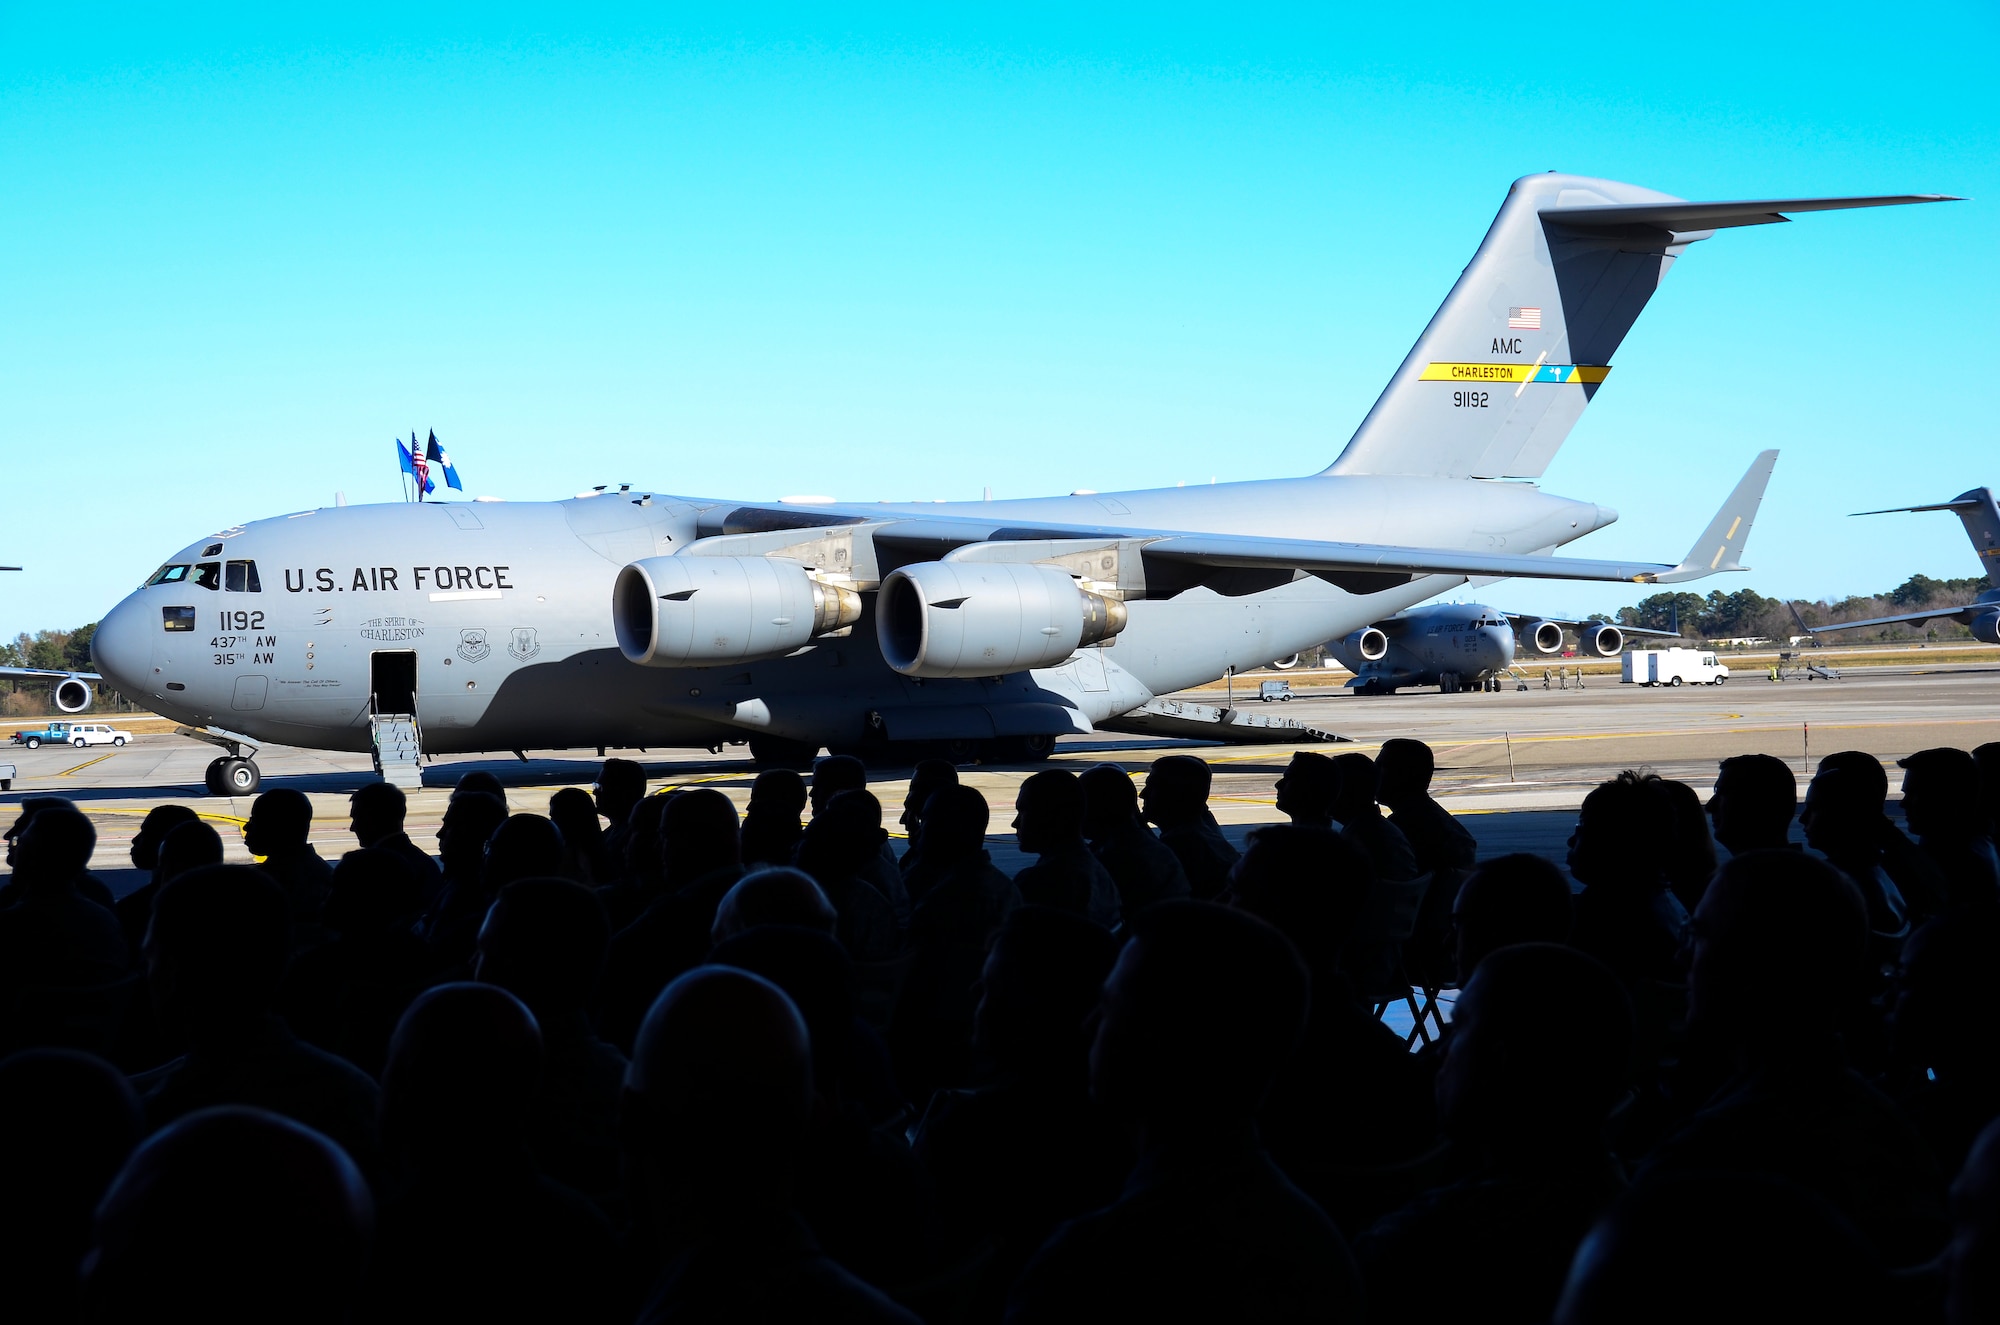 The 437th Airlift Wing held a ceremony for Aircraft 9192, December 18, 2013 at Joint Base Charleston – Air Base, S.C. The aircraft, nicknamed the “Spirit of Charleston” was the first C-17 in the U.S. Air Force’s inventory and has flown missions throughout the world for more than two decades. Those missions have totaled more than 20,000 flight hours. (U.S. Air Force photo/Staff Sgt. Anthony Hyatt) 